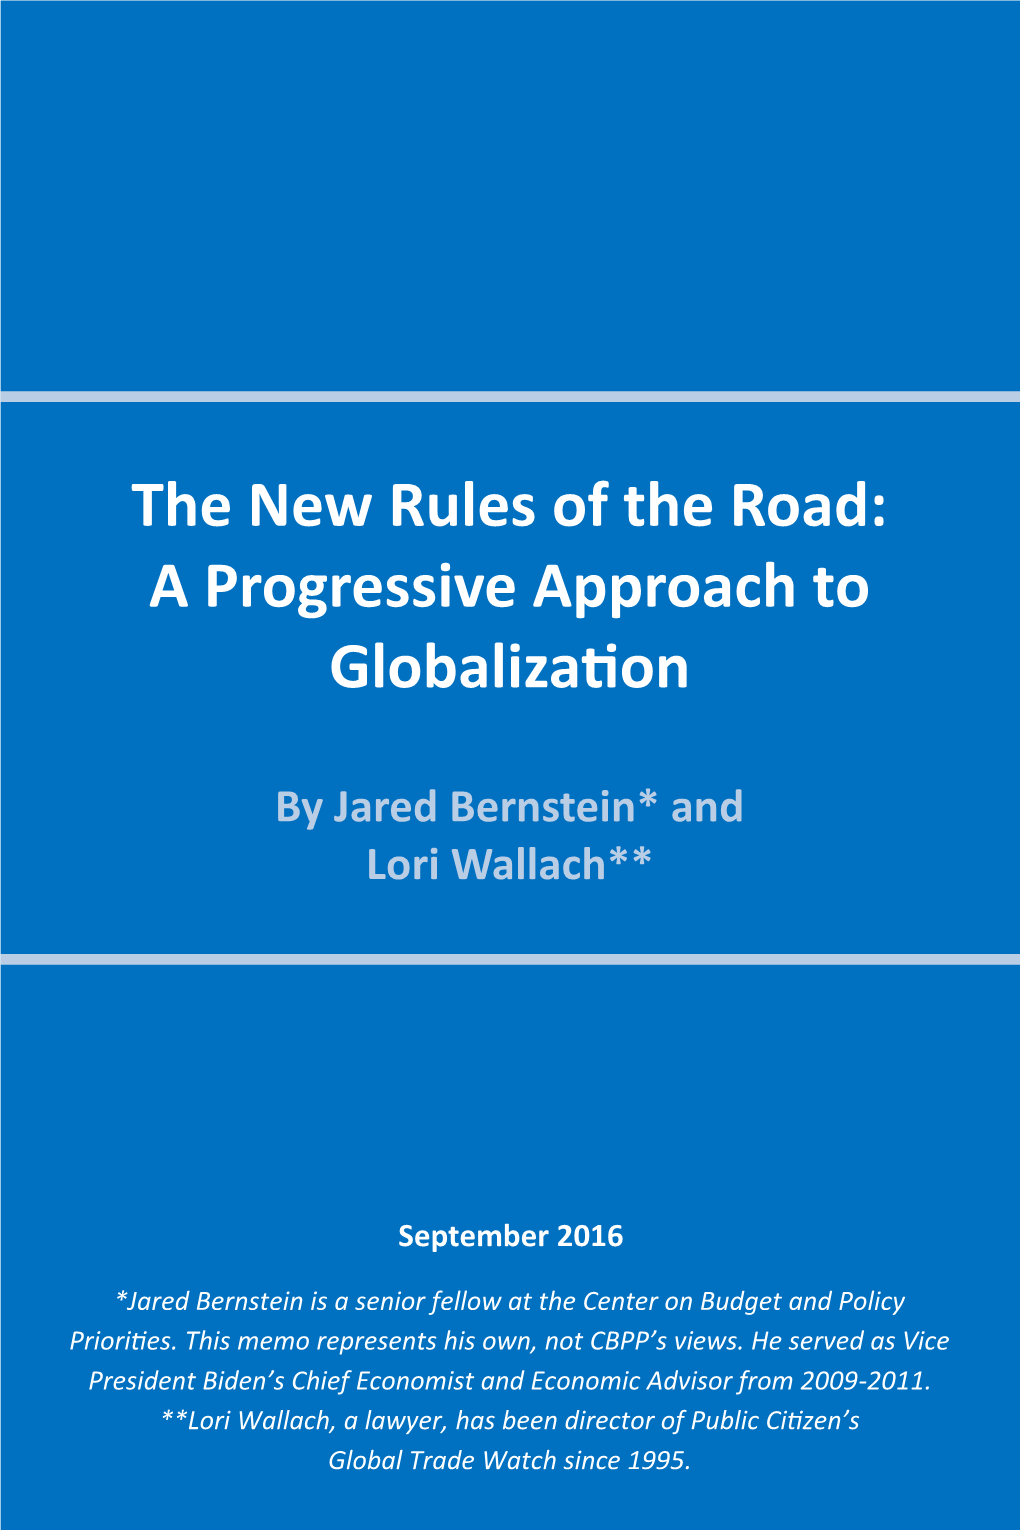 The New Rules of the Road: a Progressive Approach to Globalization